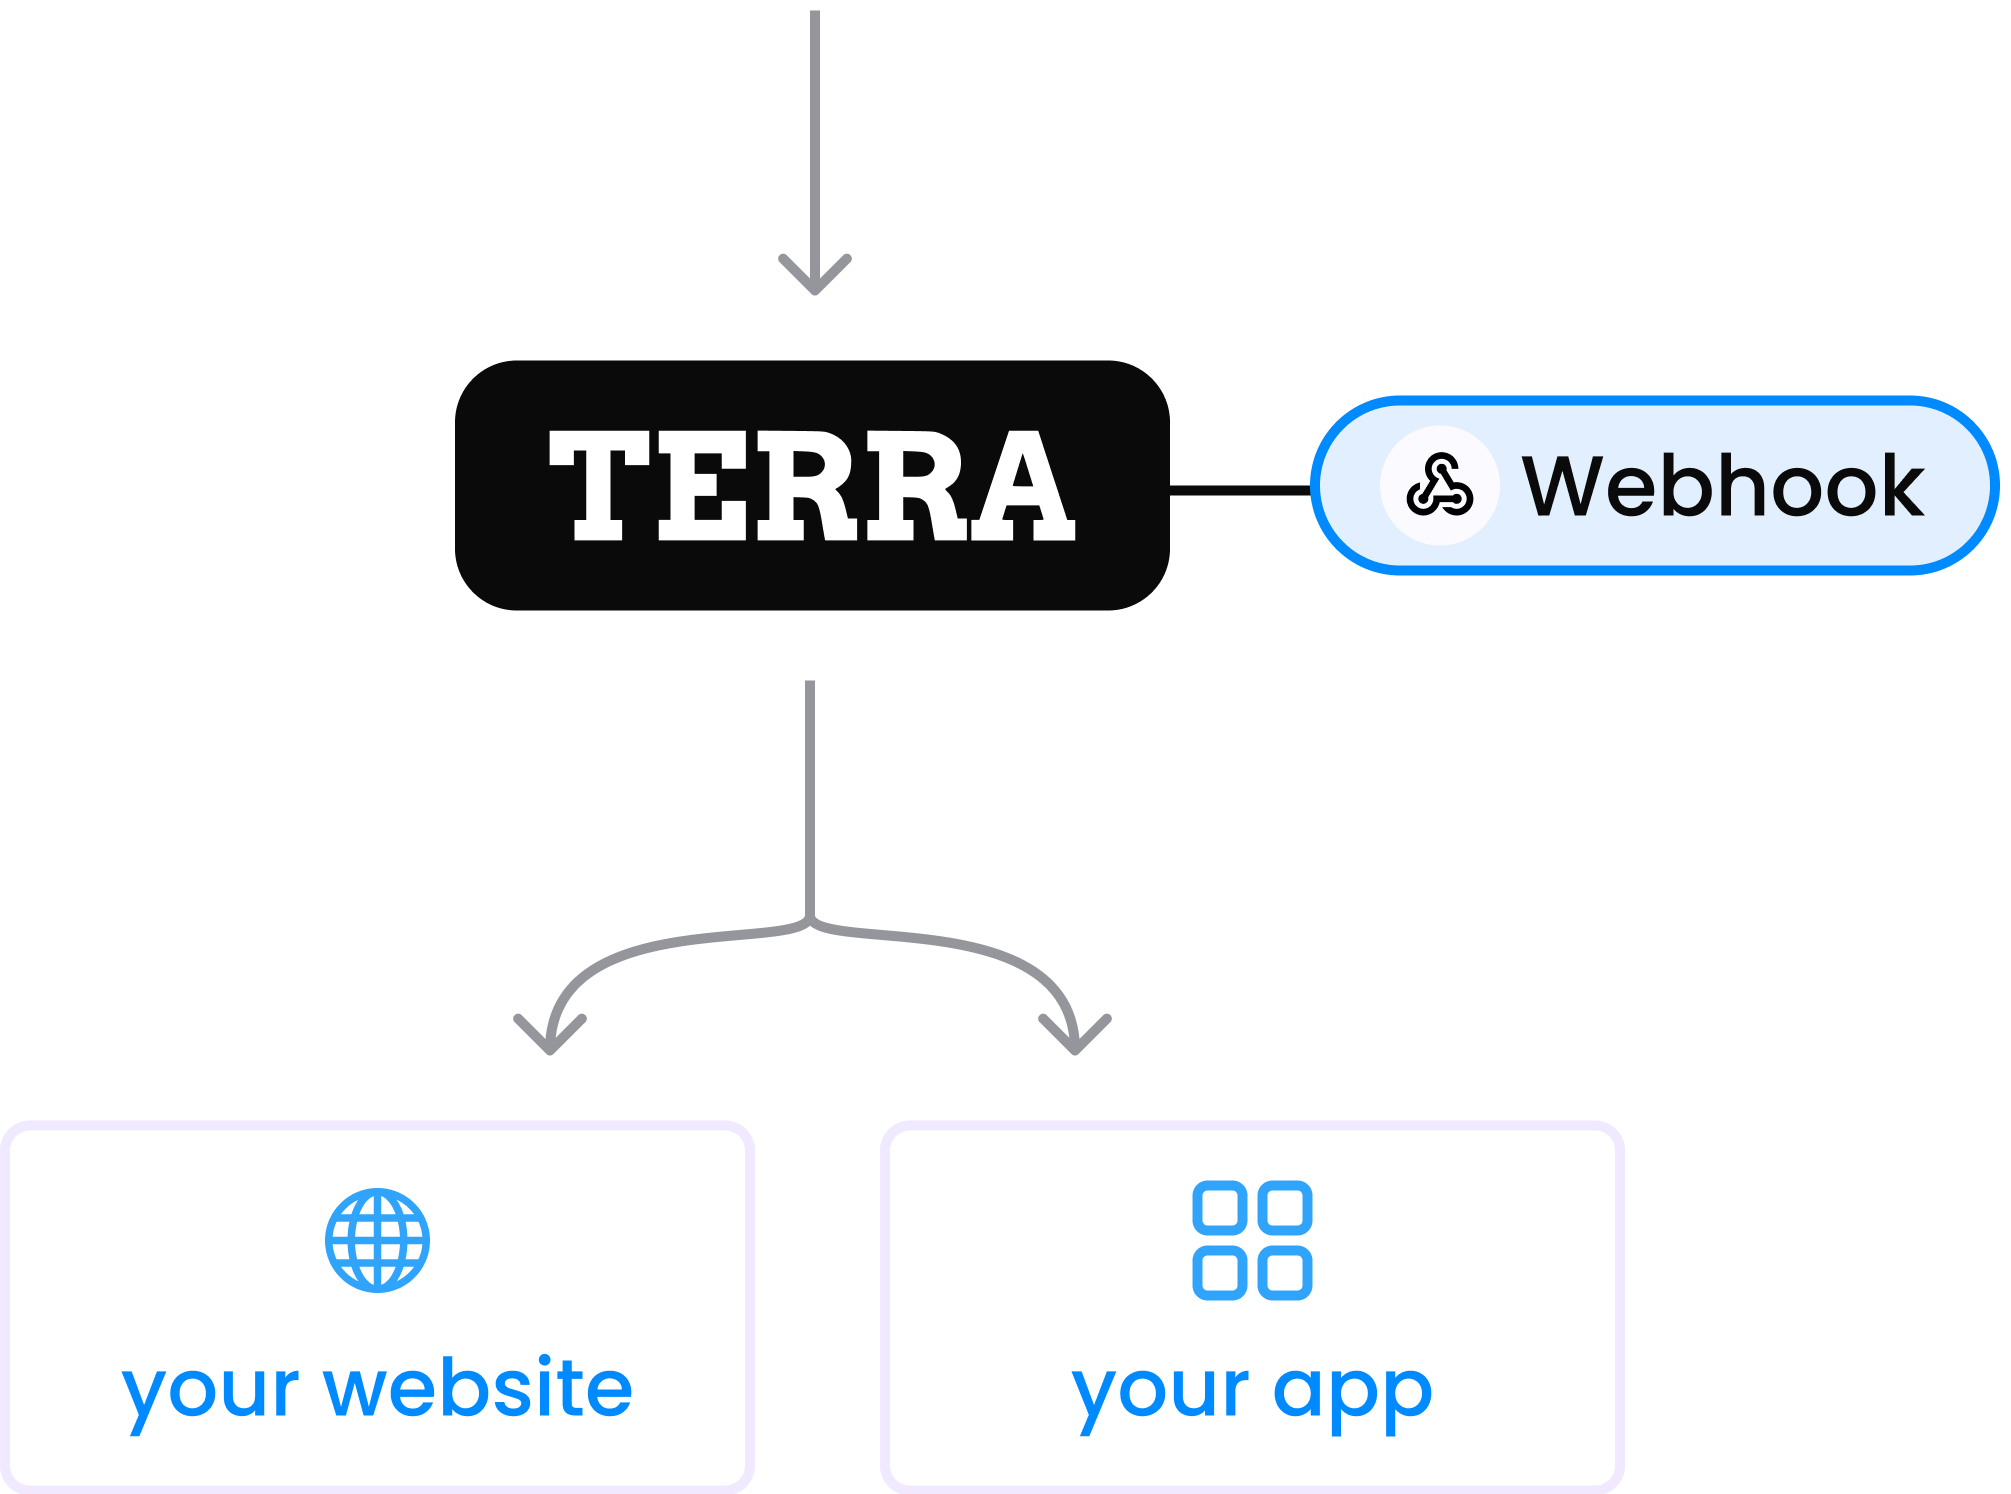 receiving data from tridot integration via webhooks to your app or website